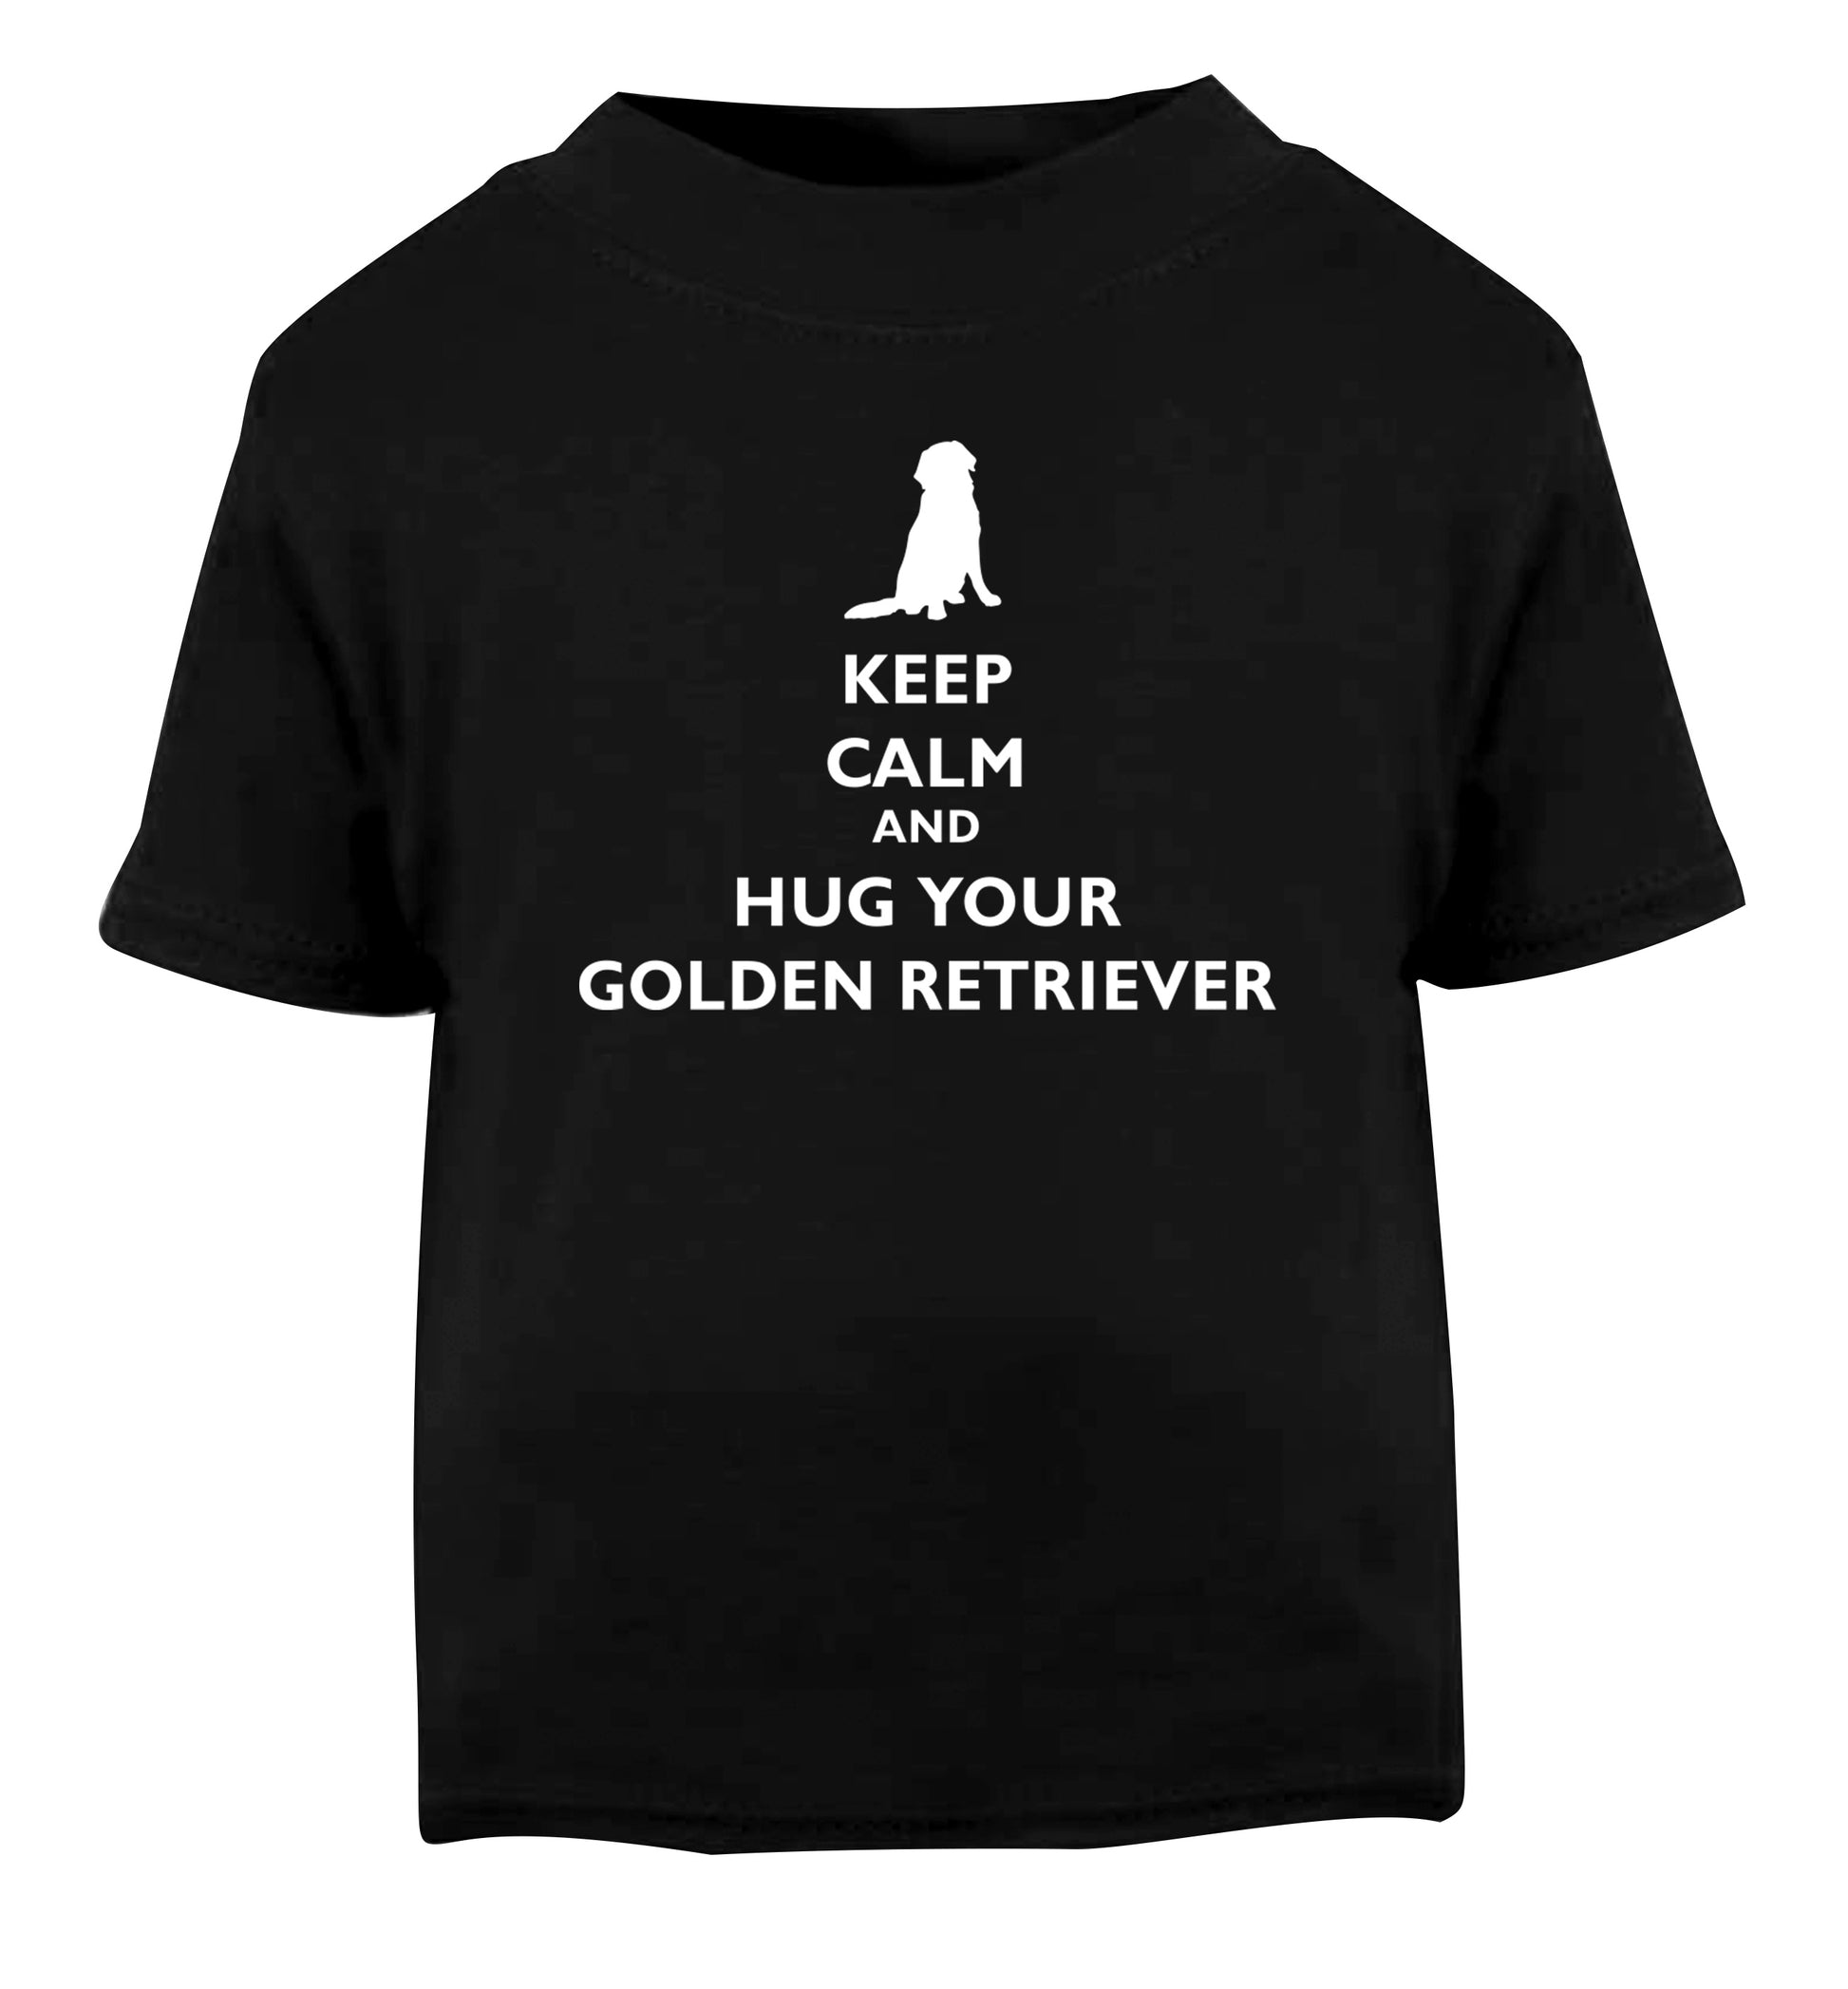 Keep calm and hug your golden retriever Black Baby Toddler Tshirt 2 years